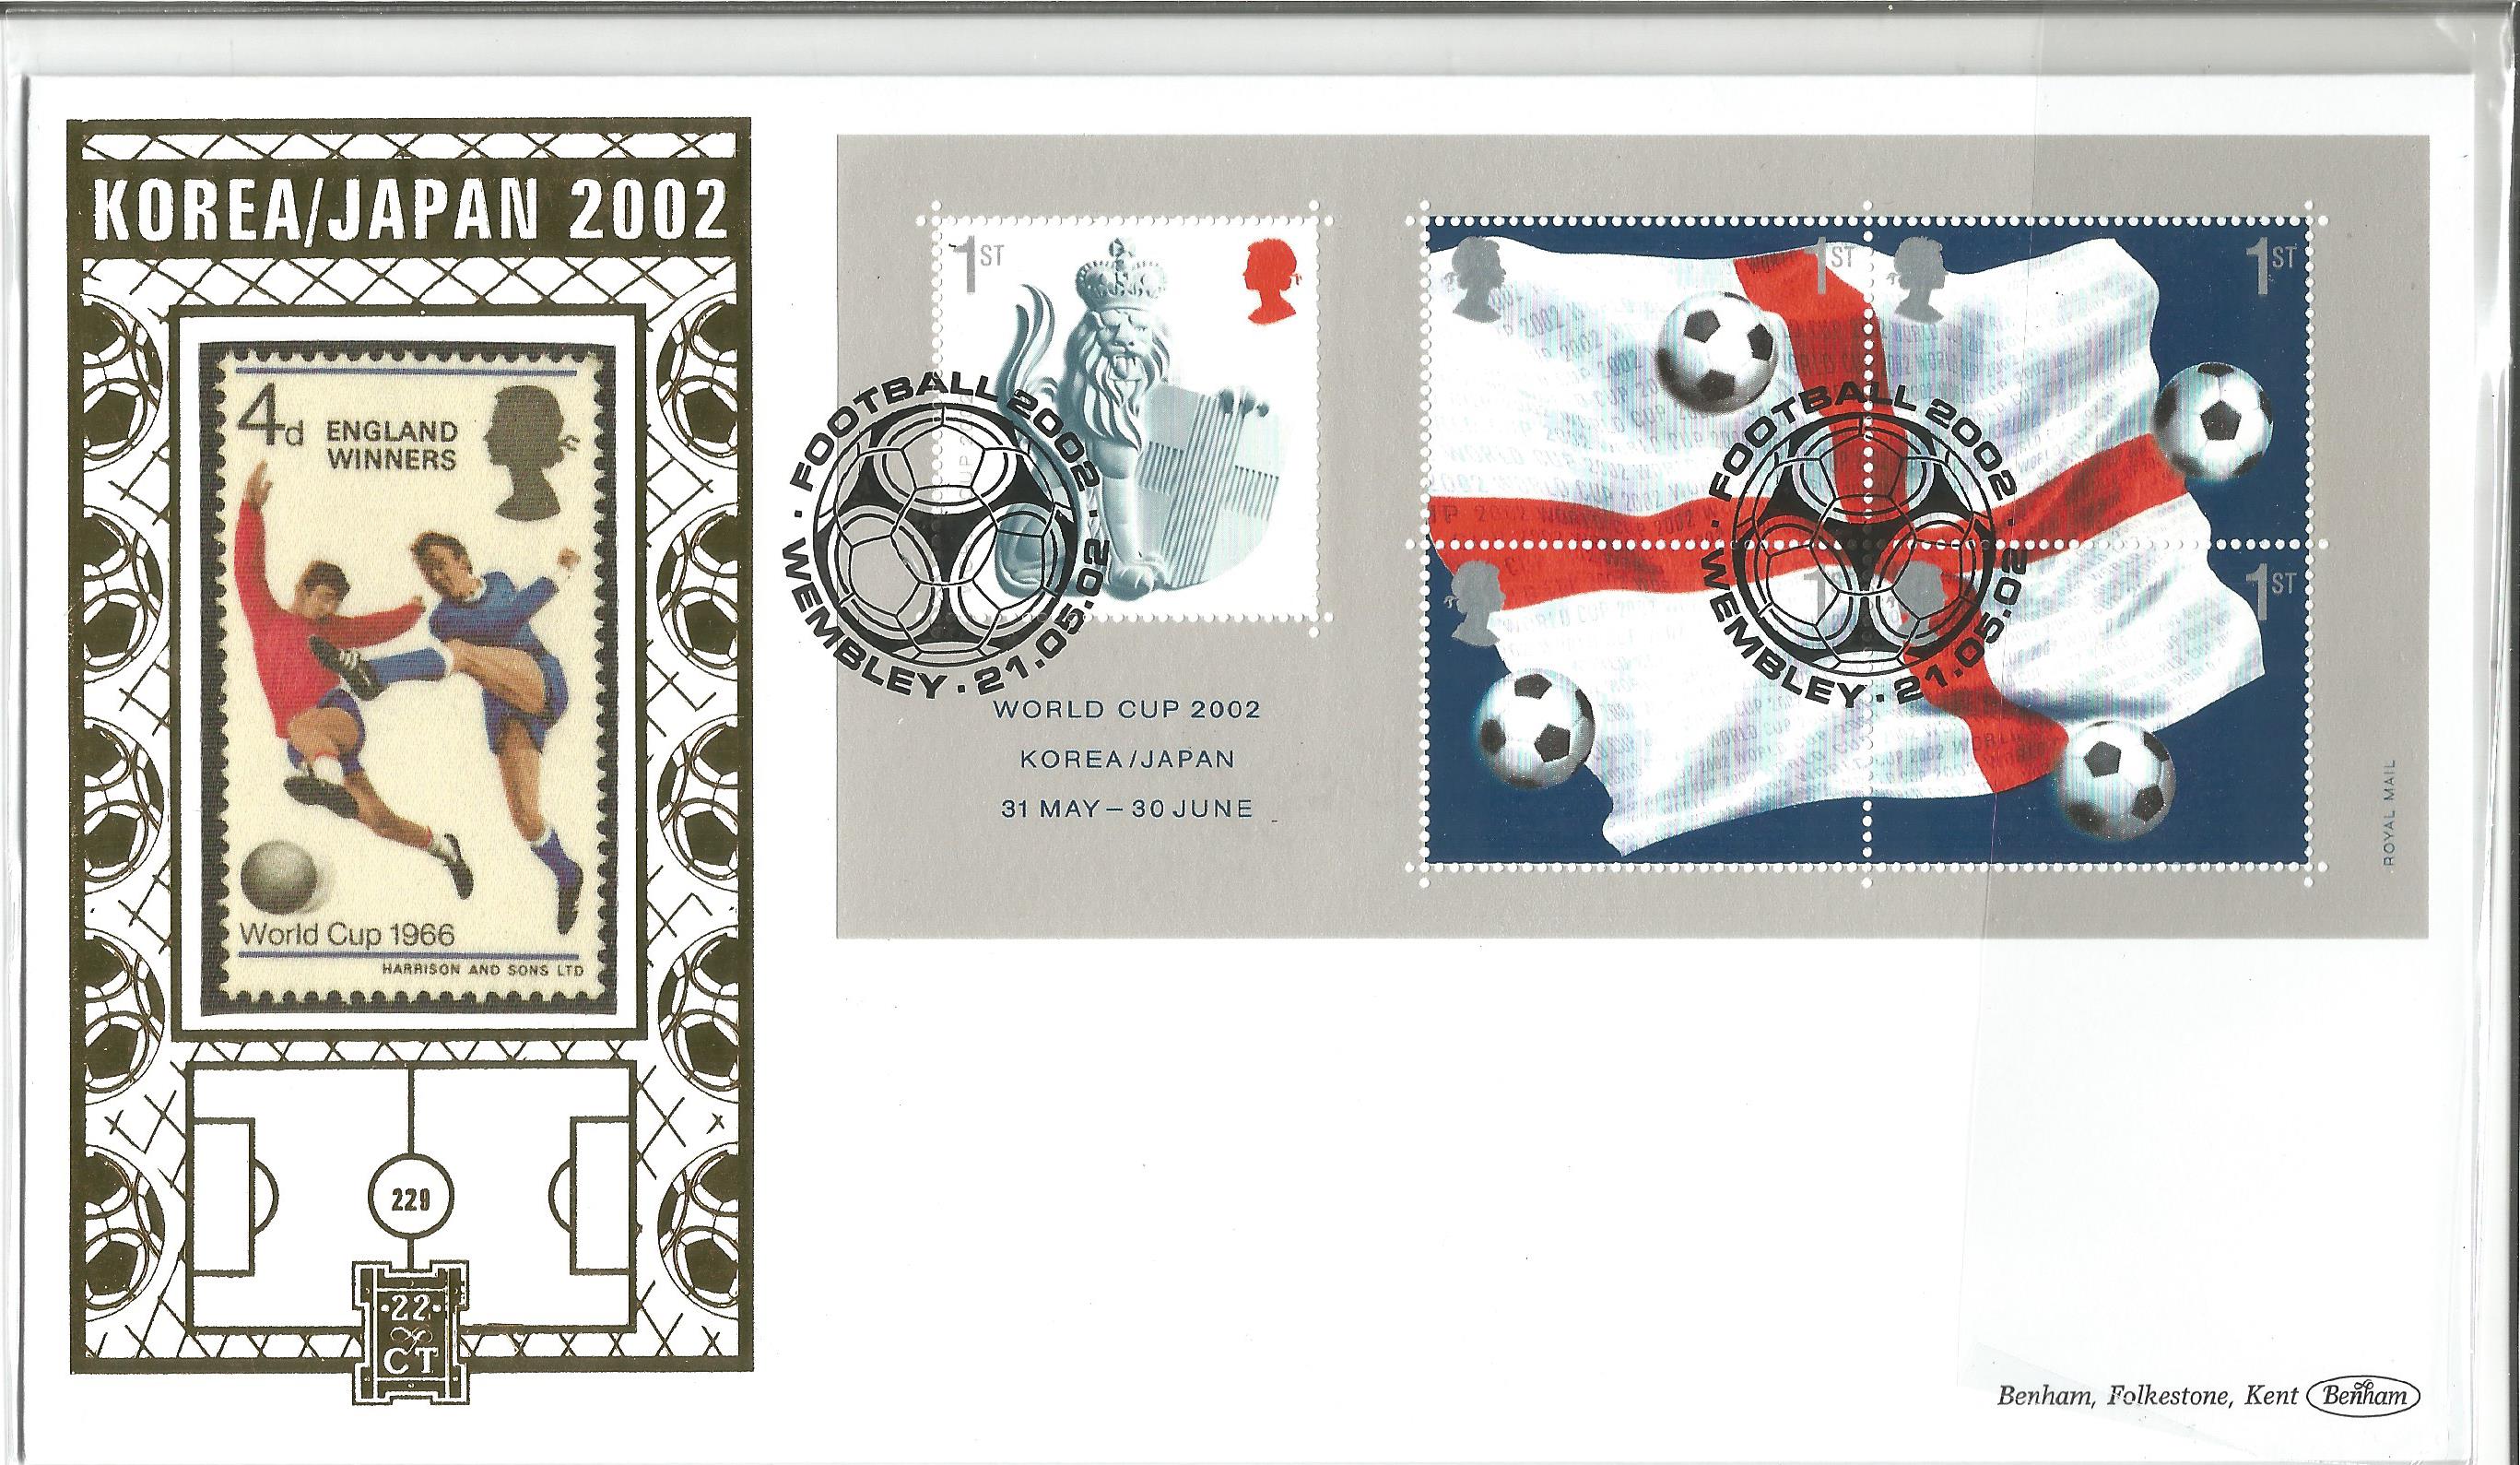 Korea/Japan 2002 England Winners World Cup 1966 Benham Gold Cover double PM Wembley 21.05.02 limited